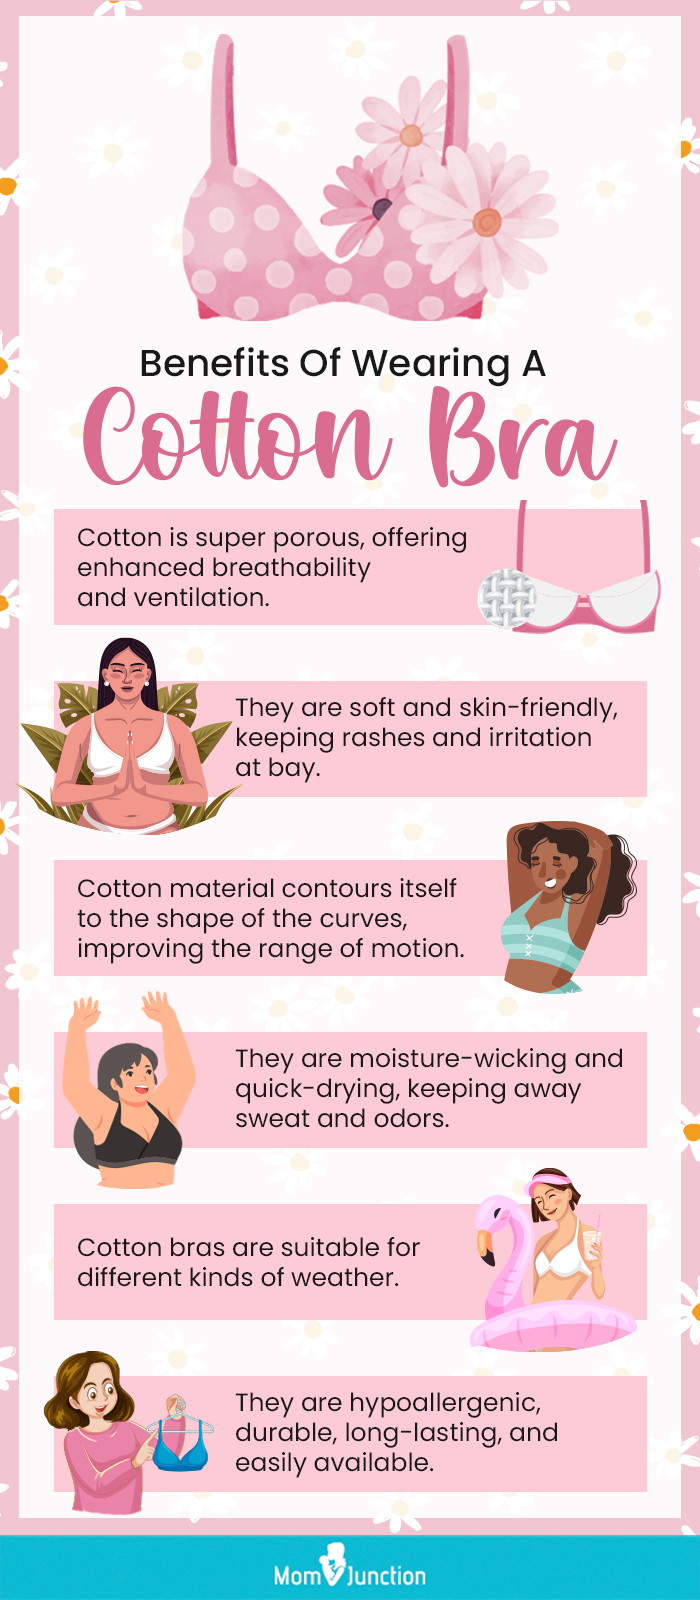 Benefits Of Wearing A Cotton Bra (infographic)